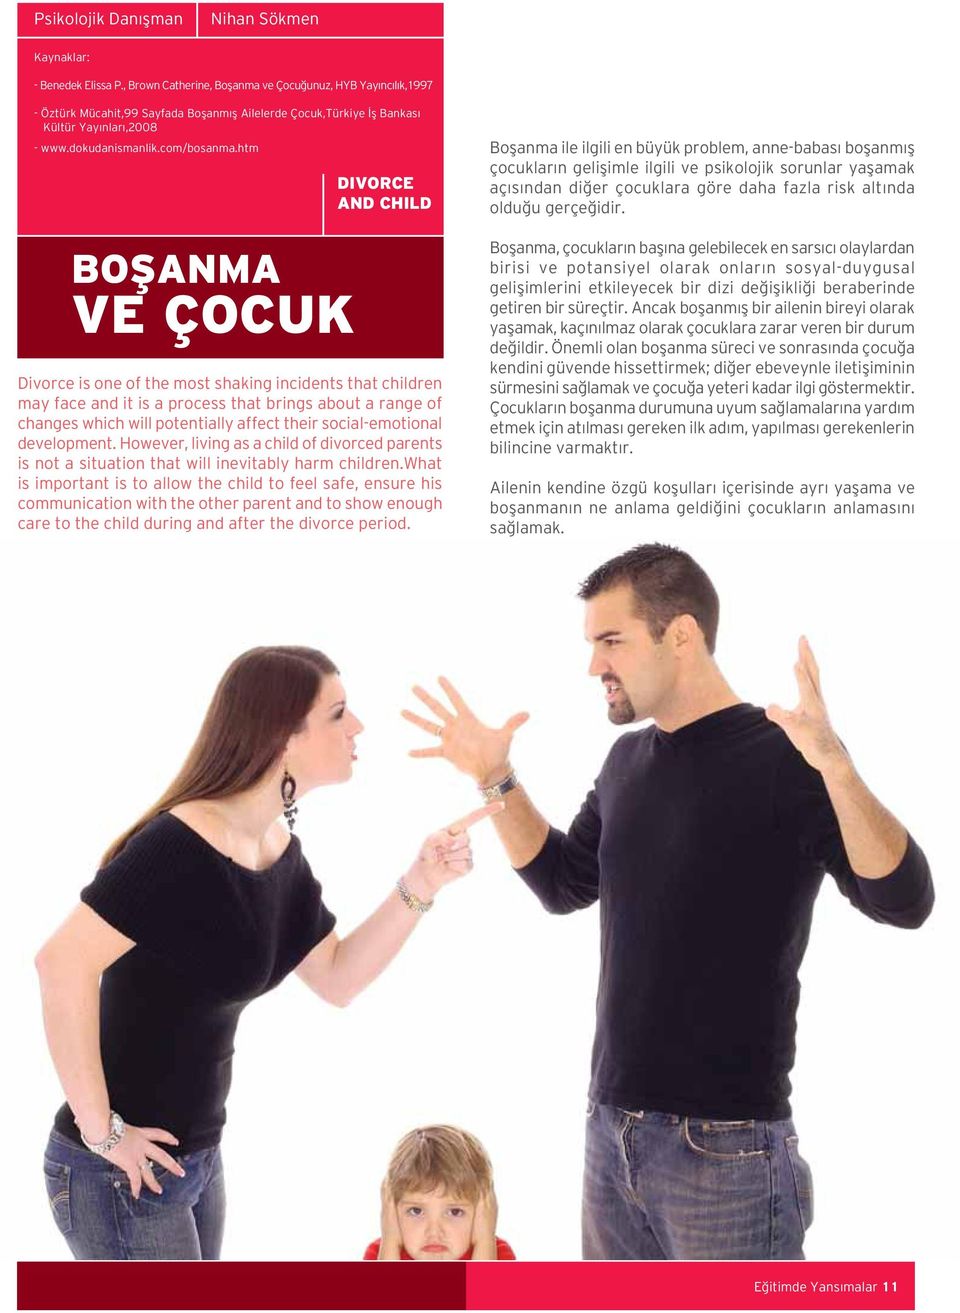 htm BOŞANMA VE ÇOCUK DIVORCE AND CHILD Divorce is one of the most shaking incidents that children may face and it is a process that brings about a range of changes which will potentially affect their